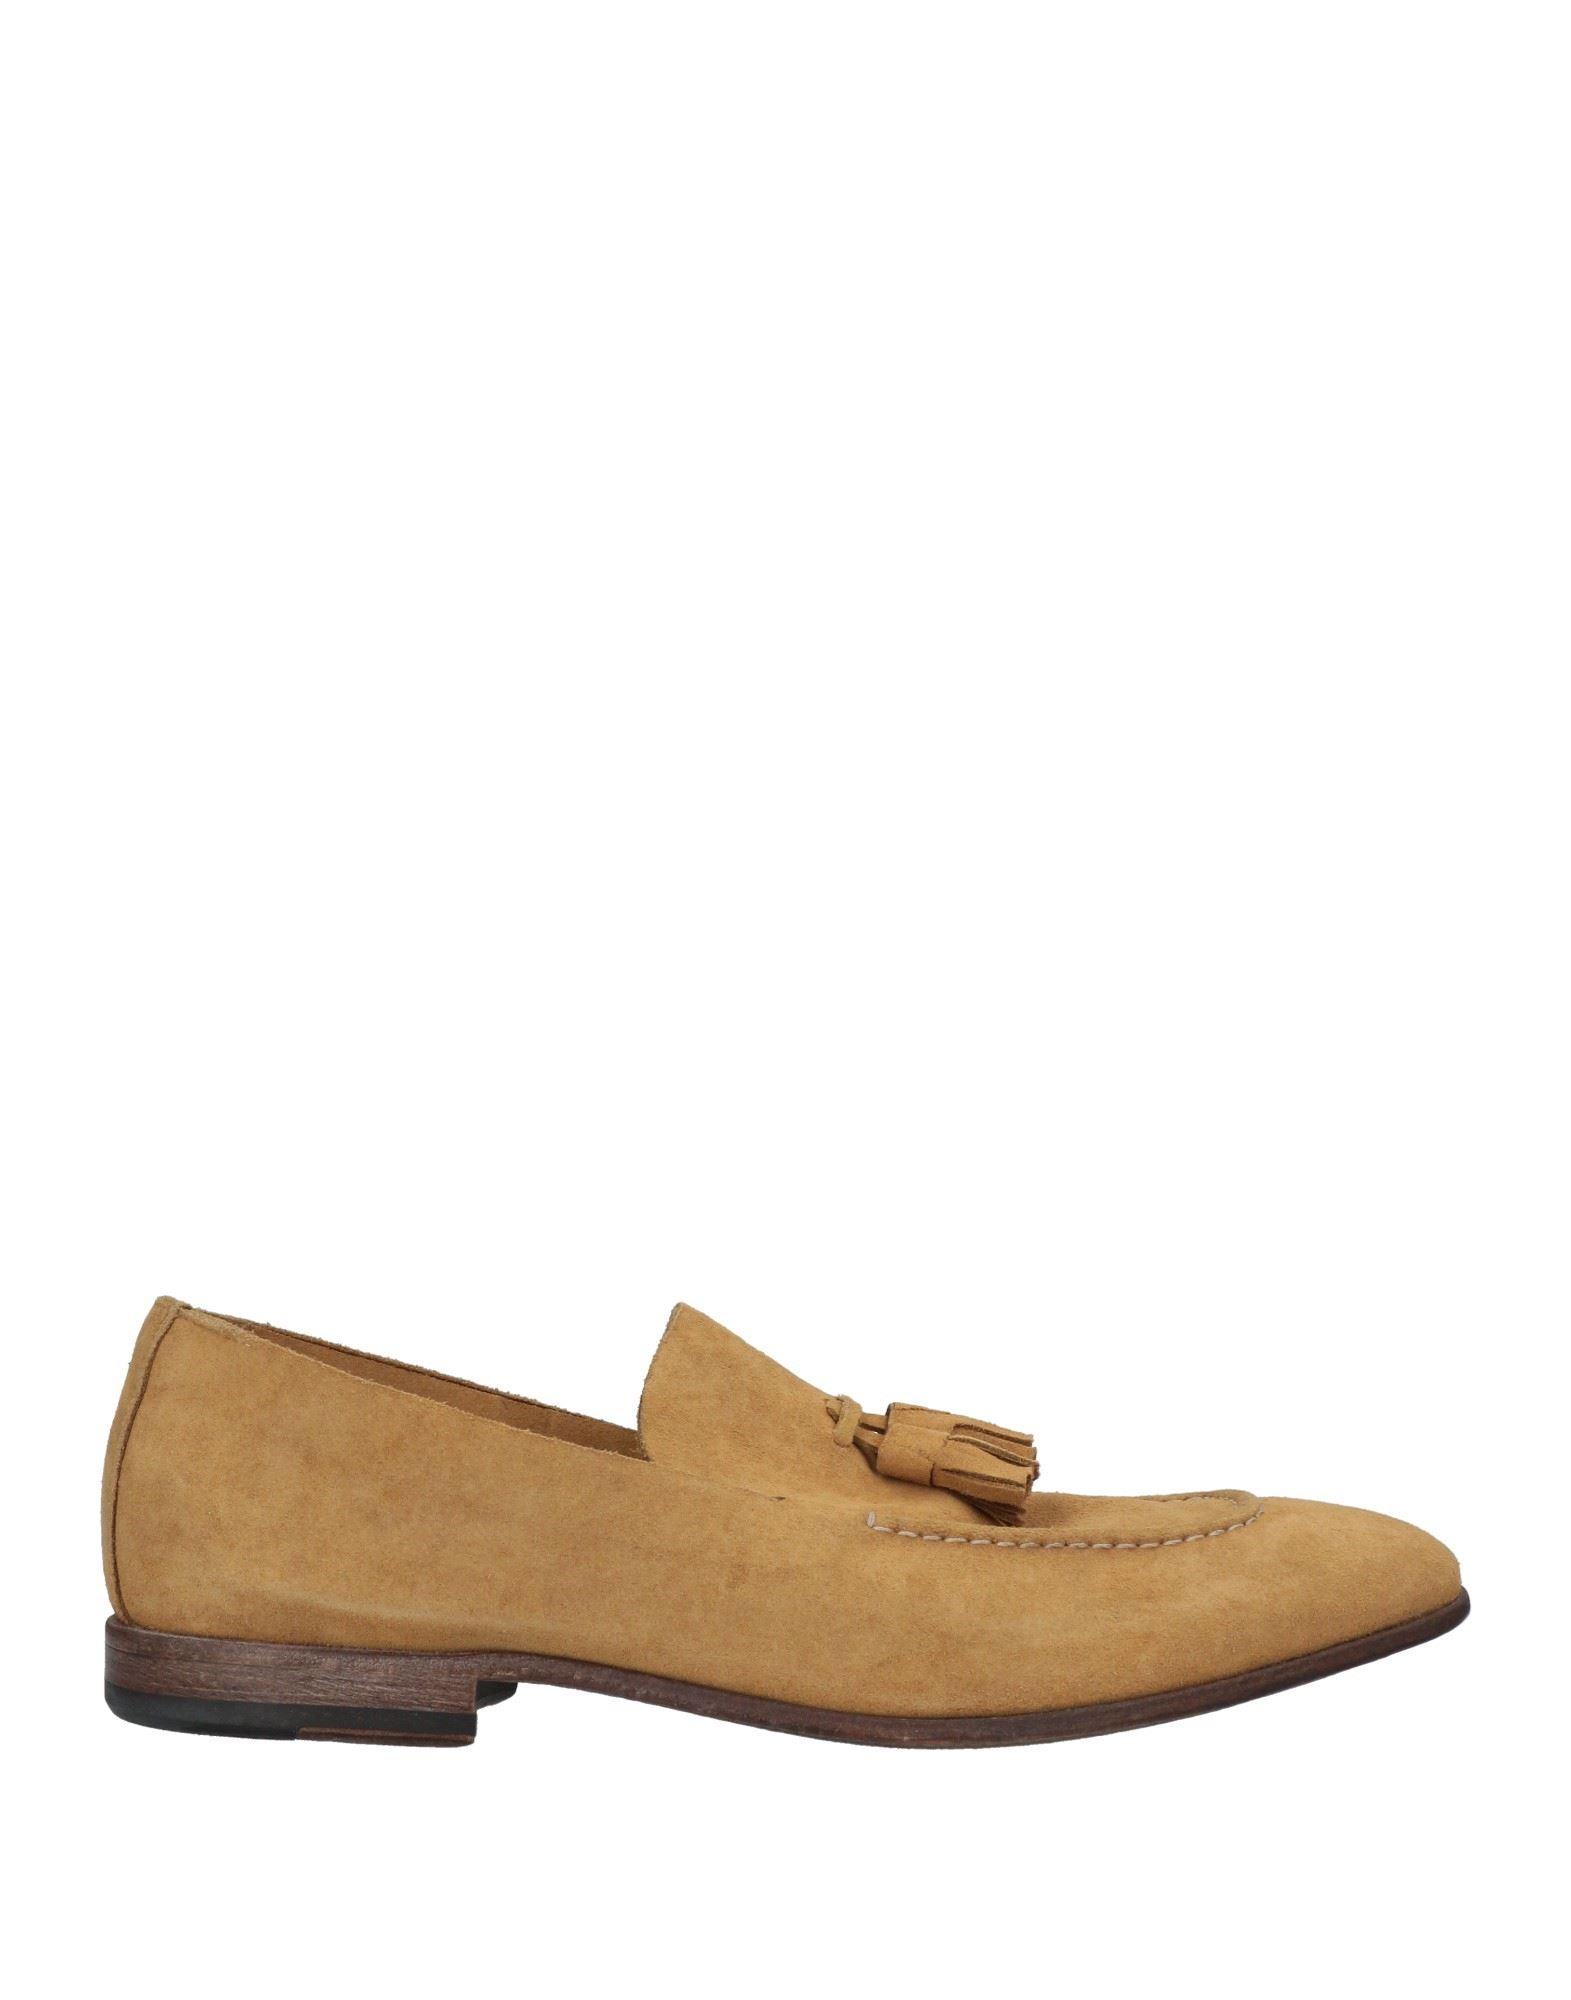 Preventi Loafers in Natural for Men | Lyst